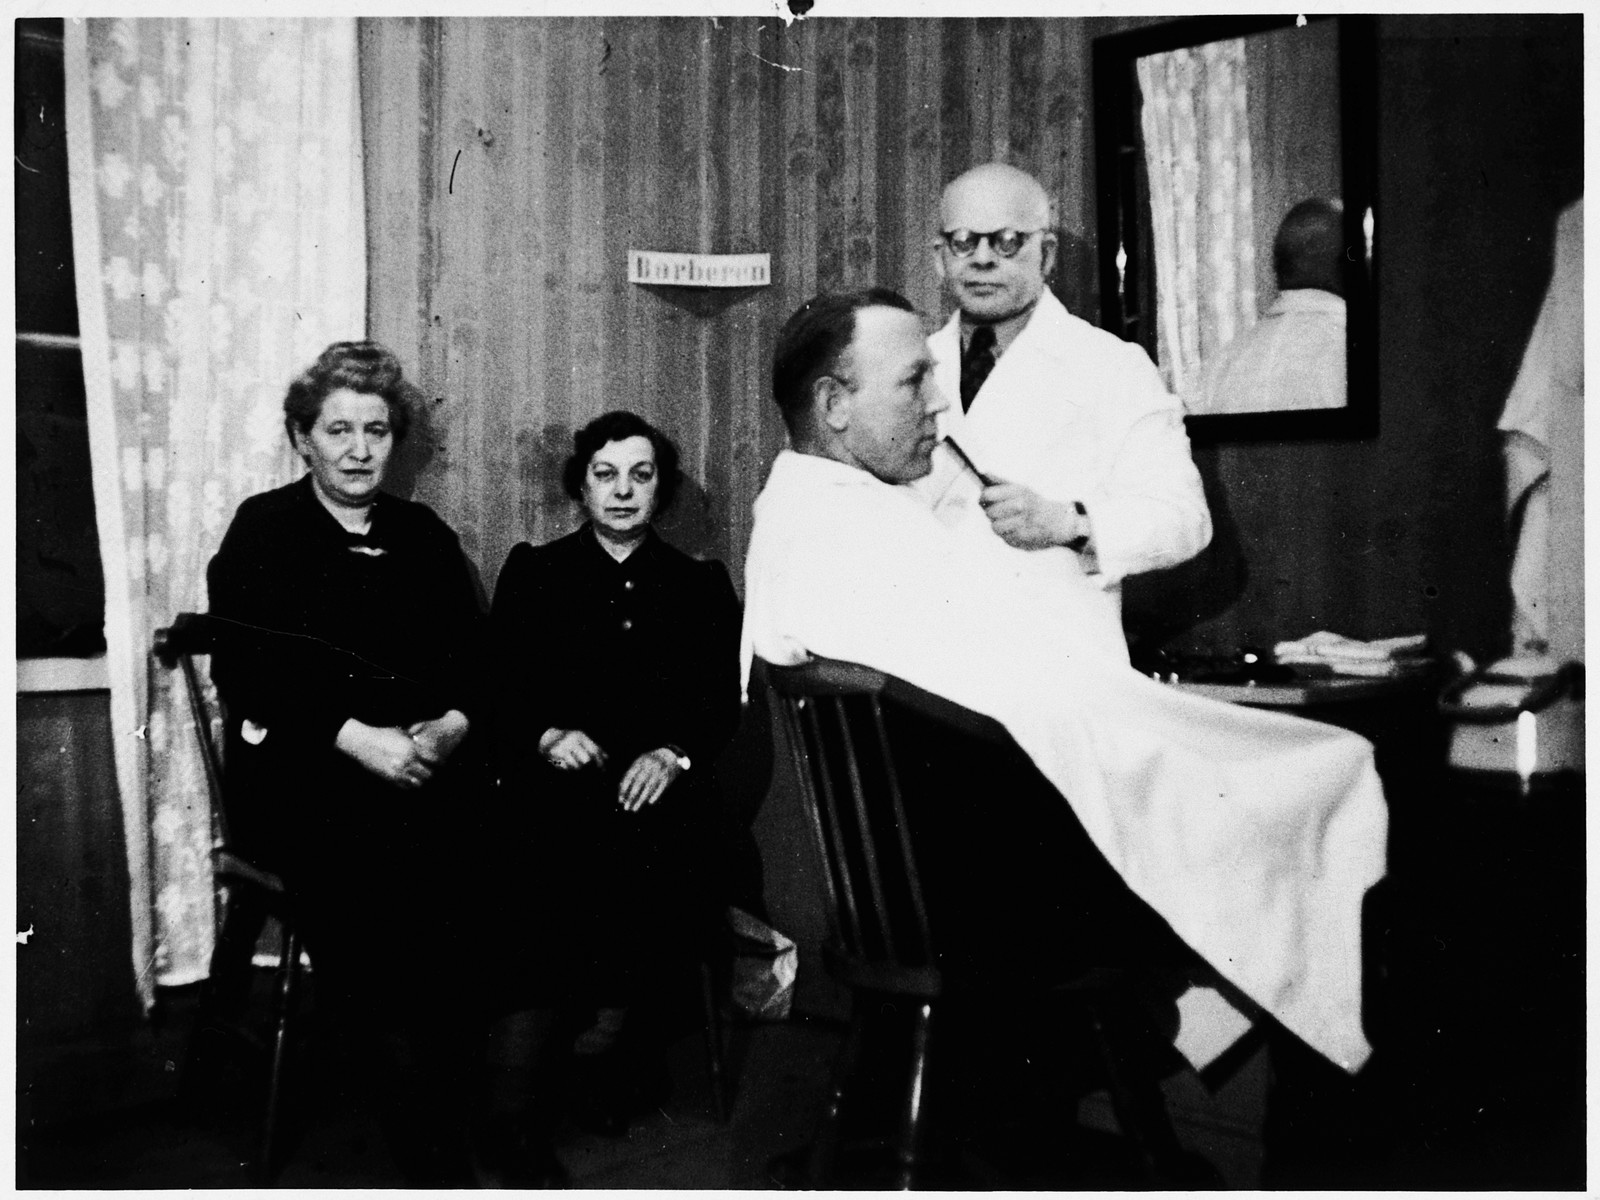 A Jewish refugee from Denmark, who was ferried to Sweden during the Danish rescue operation in October 1943, works at his own barbershop in Sweden.